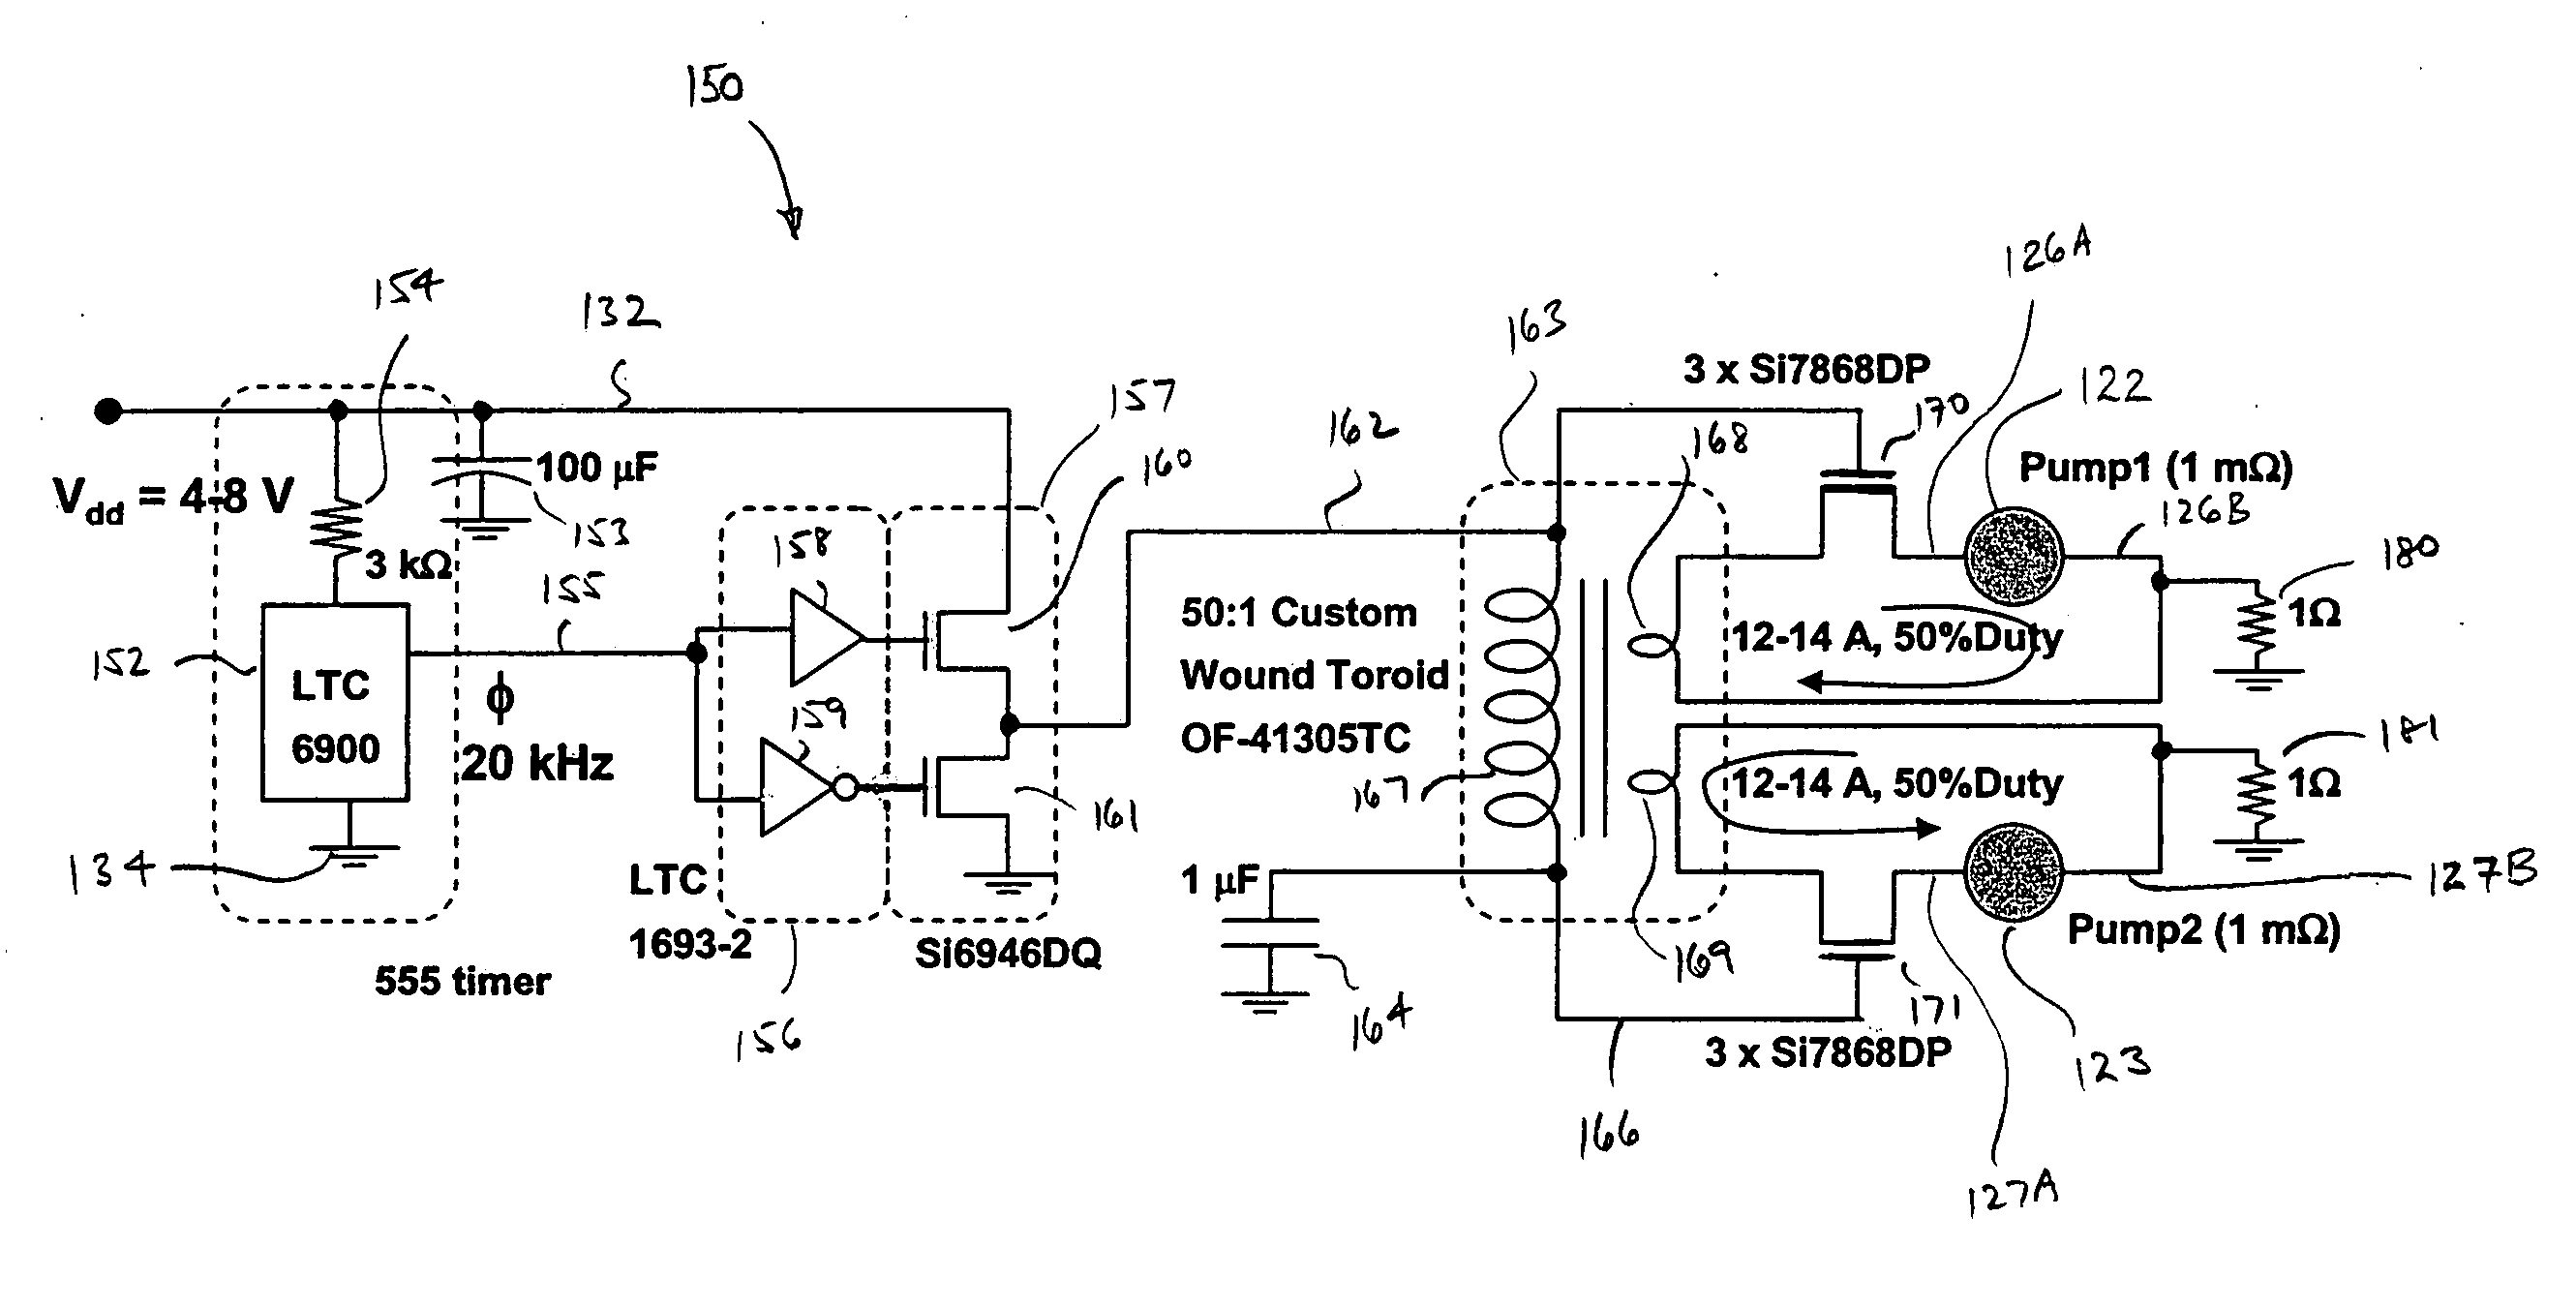 Series gated secondary loop power supply configuration for electromagnetic pump and integral combination thereof